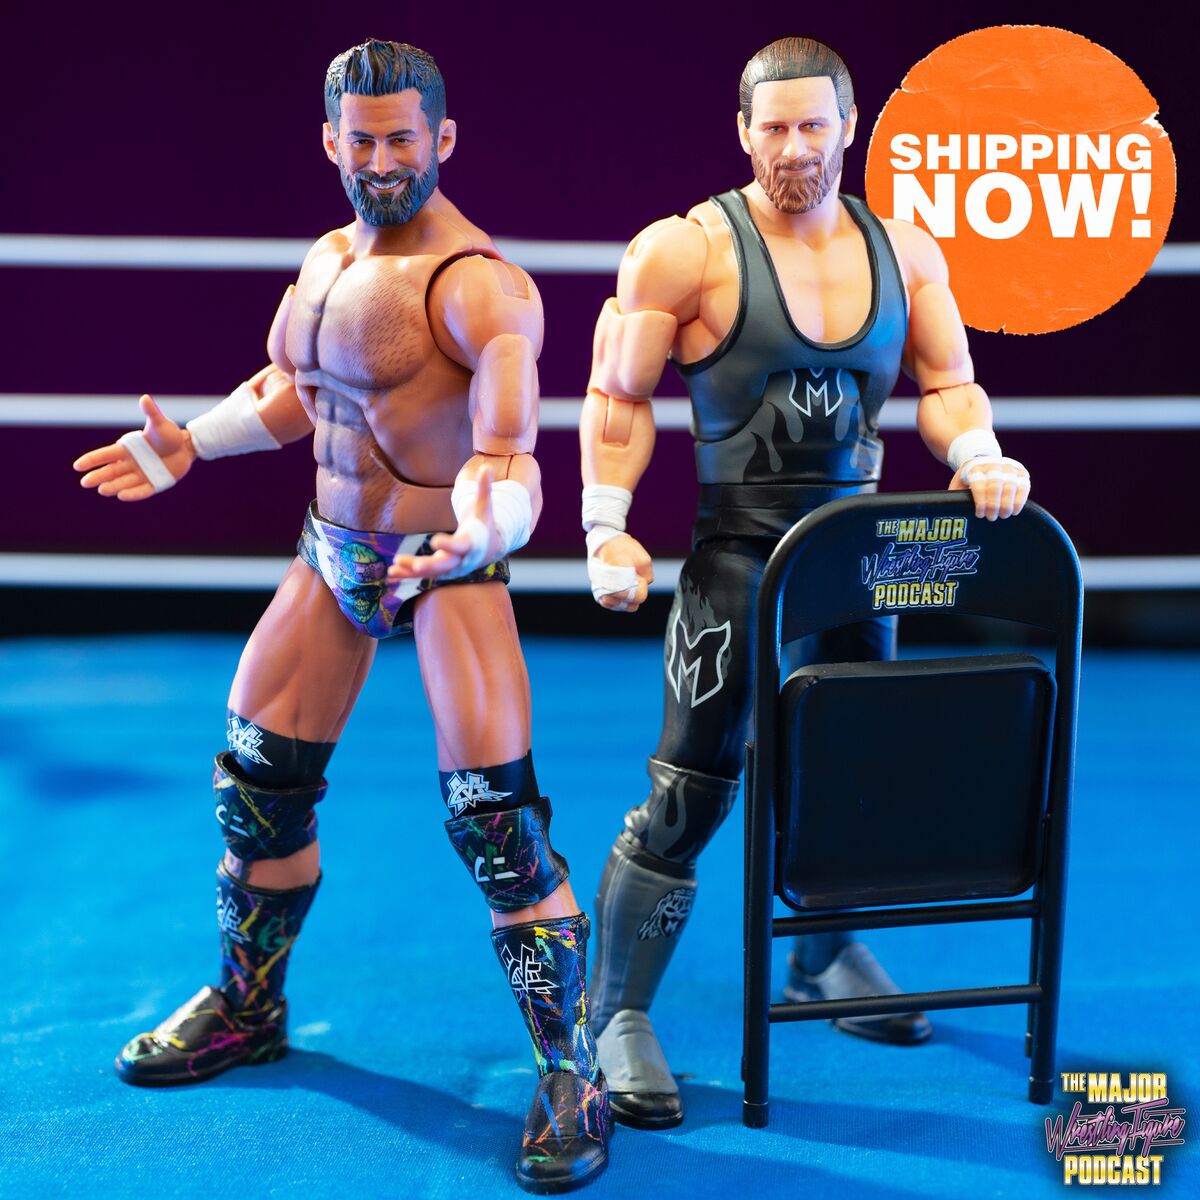 SHIPPING NOW! The made-to-order, 7” scale The Major Wrestling Figure Podcast ULTIMATES Wave 2 with Matt Cardona and Brian Myers, is shipping now! Simpsons fans, tag us in your ULTIMATES! photos! #super7